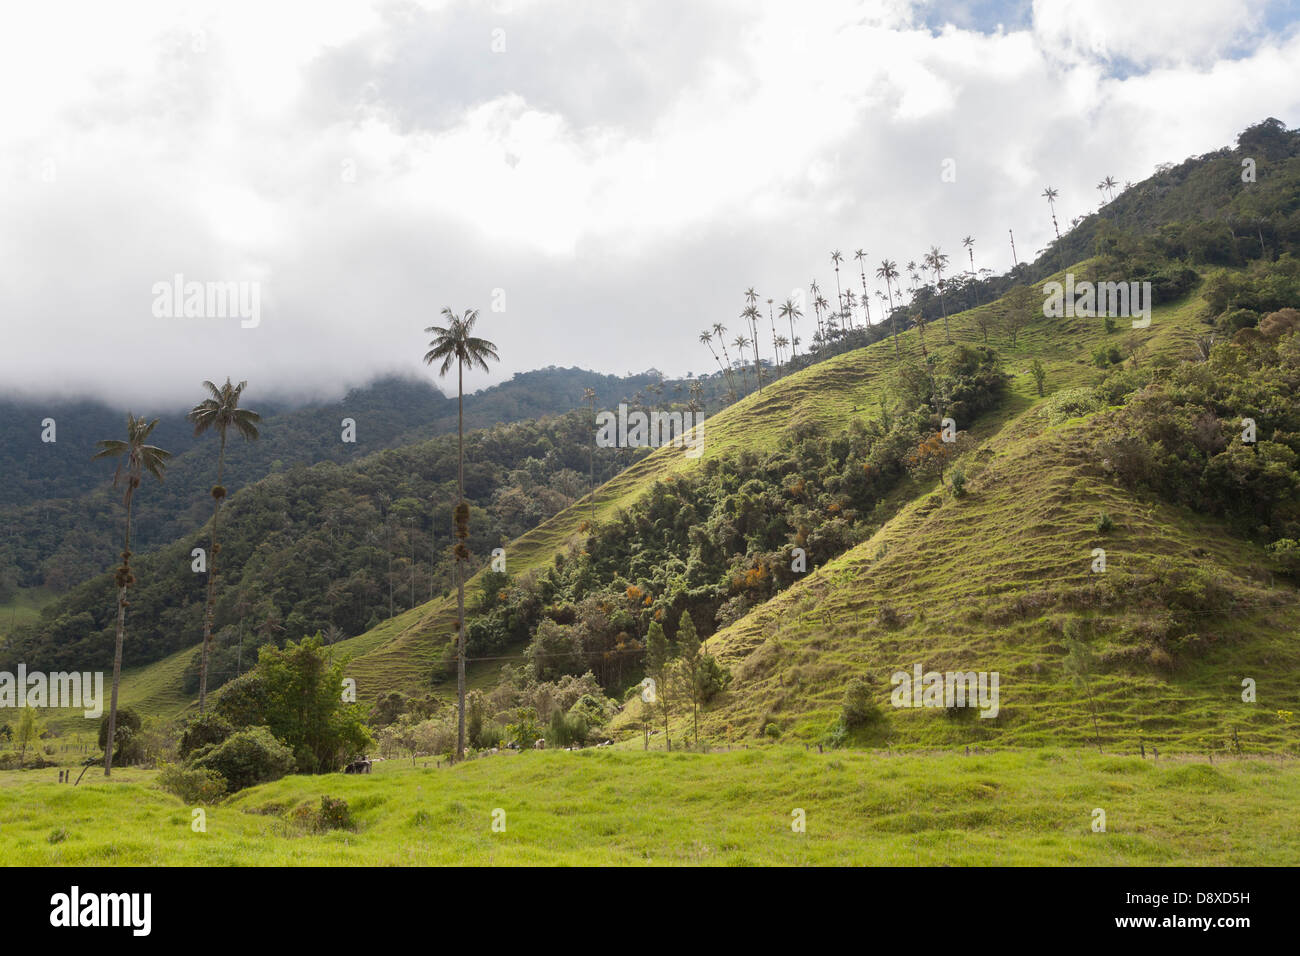 Cocora Valley, Acaime Natural Reserve, Salento, Colombia Stock Photo